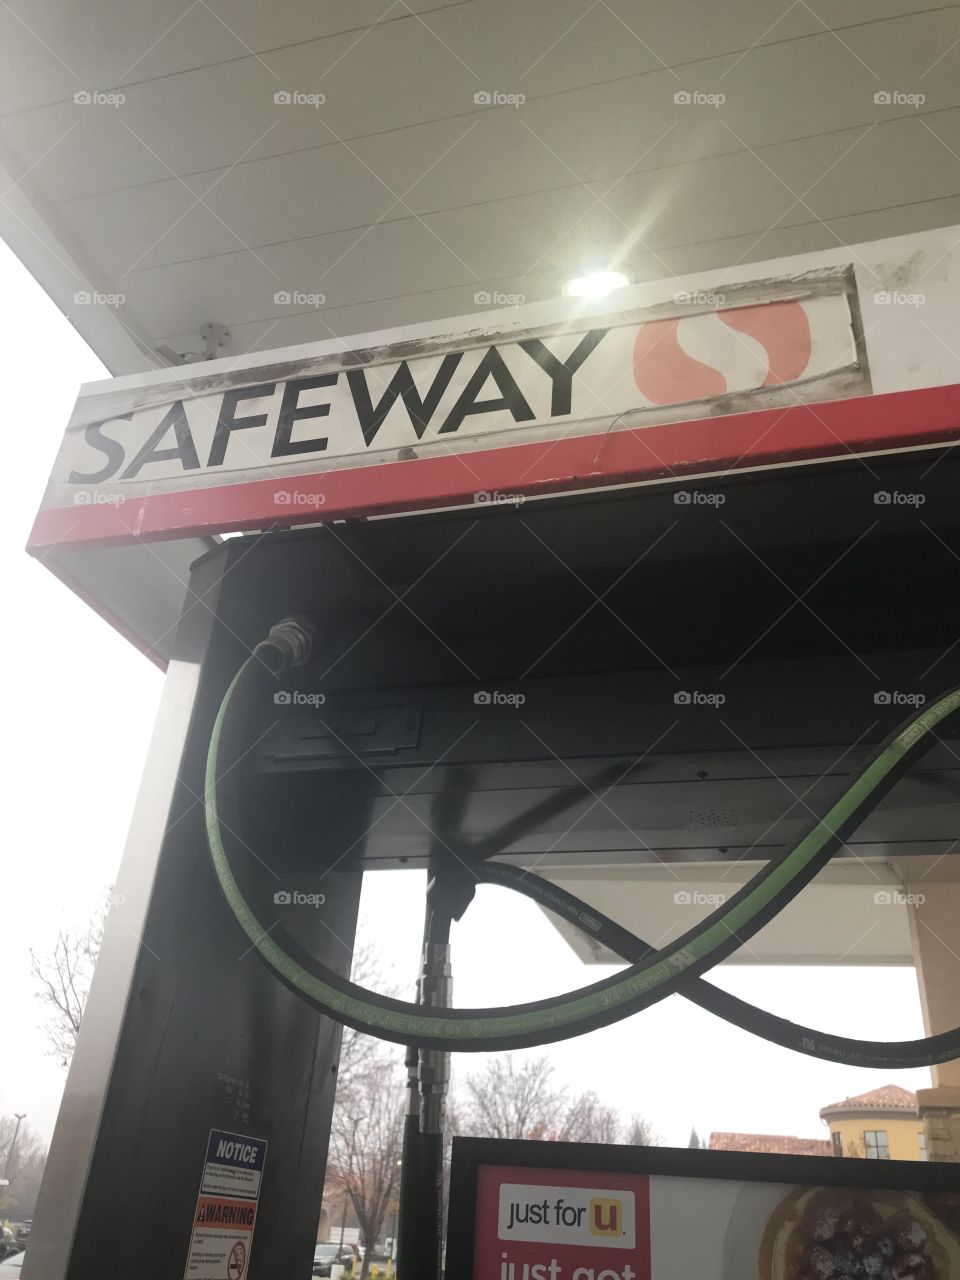 The Outside view of the Safe gas station fueling station located in USA, America .